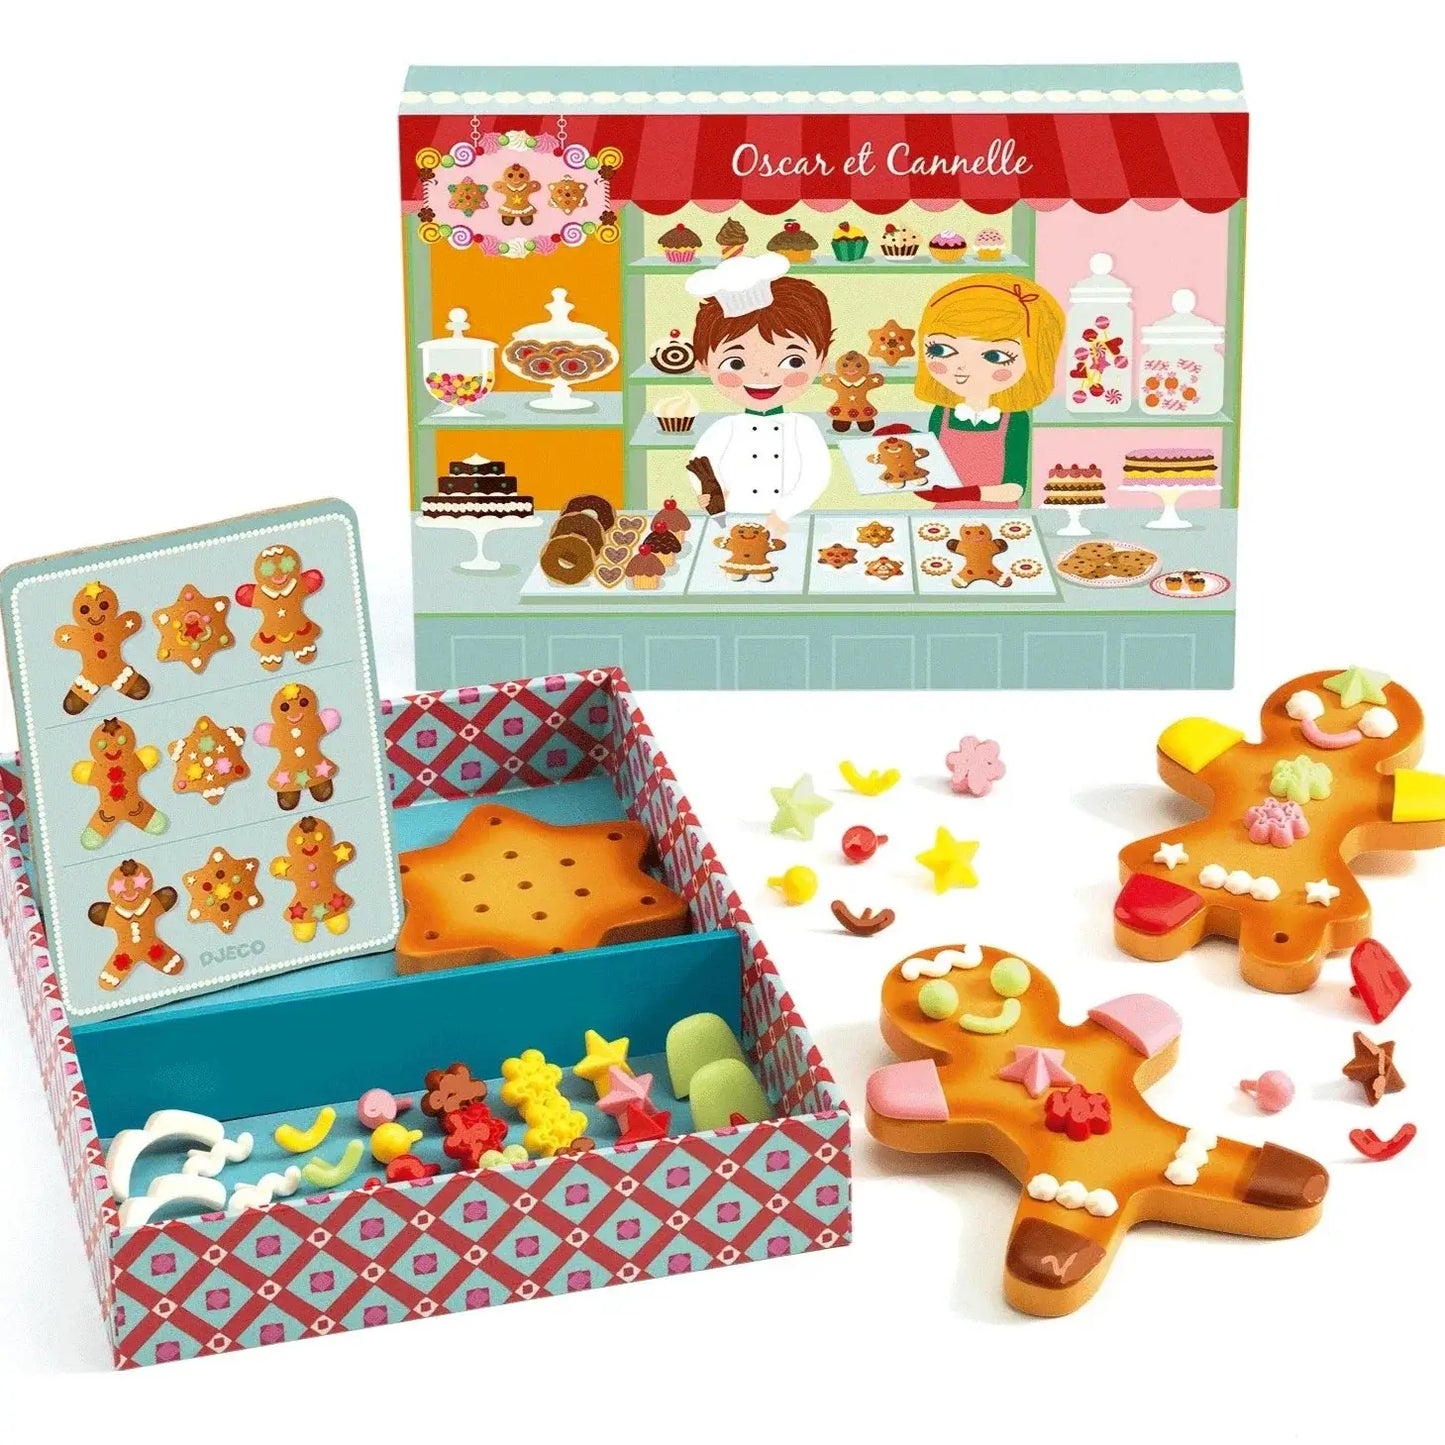 Oscar & Cannelle Patisserie Playset